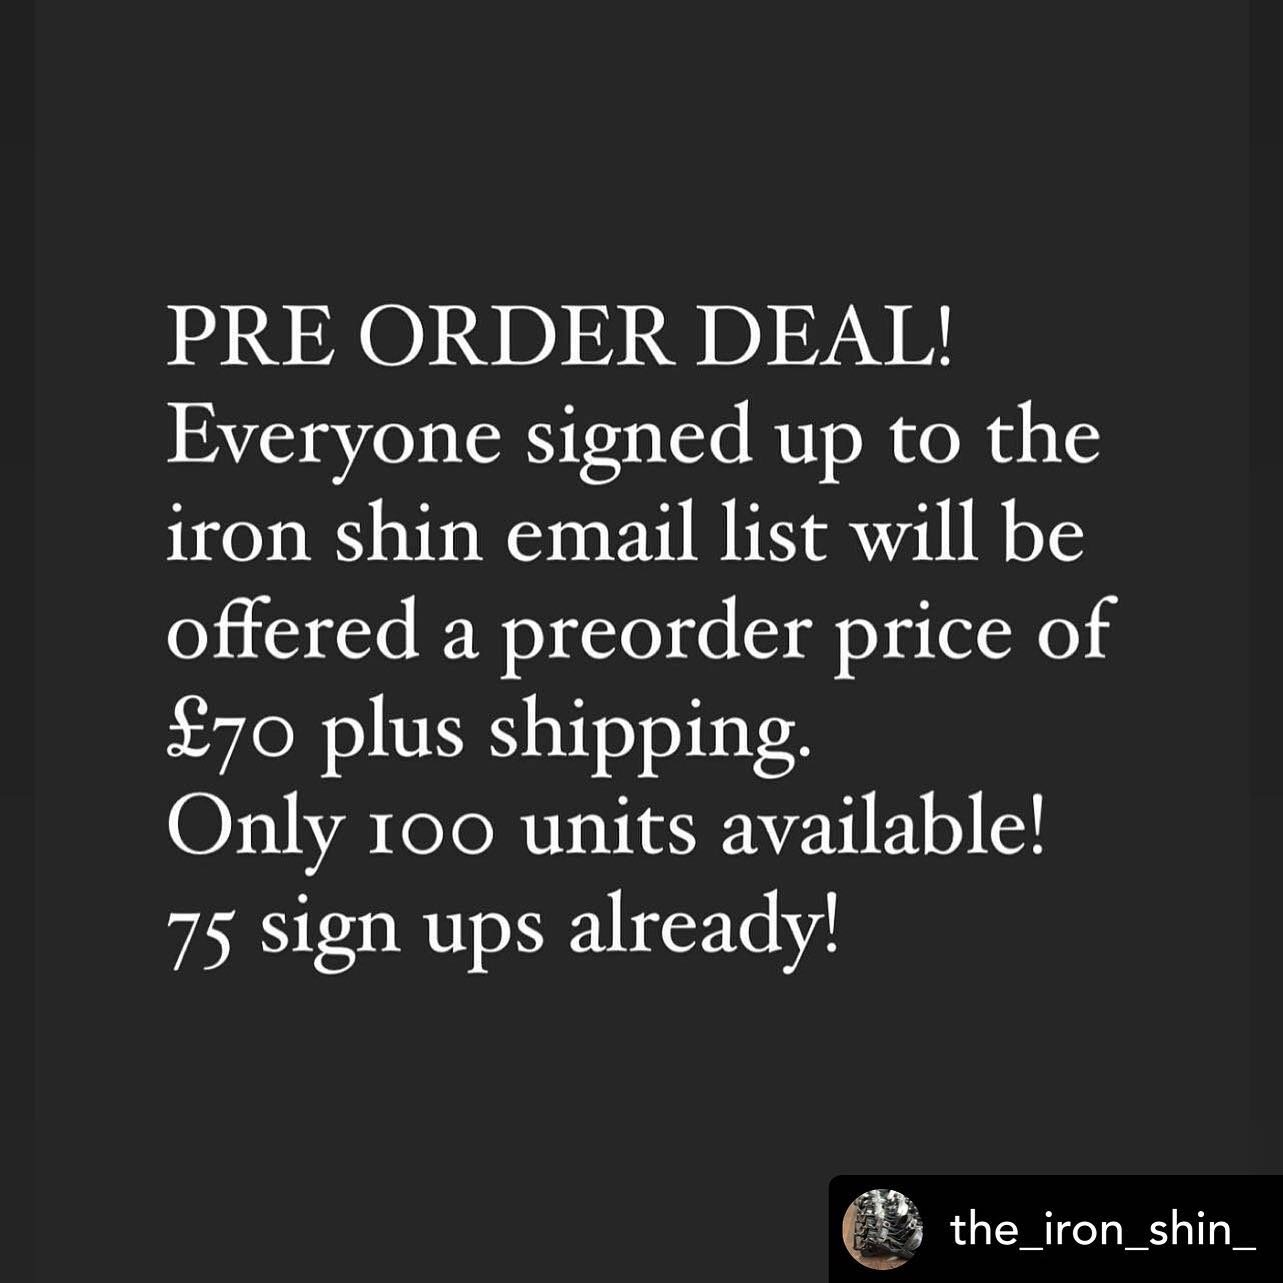 I&rsquo;ve been pretty blow away by all the signups so I&rsquo;ve decided to offer a preorder deal to everyone that signs up to the Iron shin email list on the product page. Links in the bio.
This is a special preorder price. I&rsquo;m making 100 thi